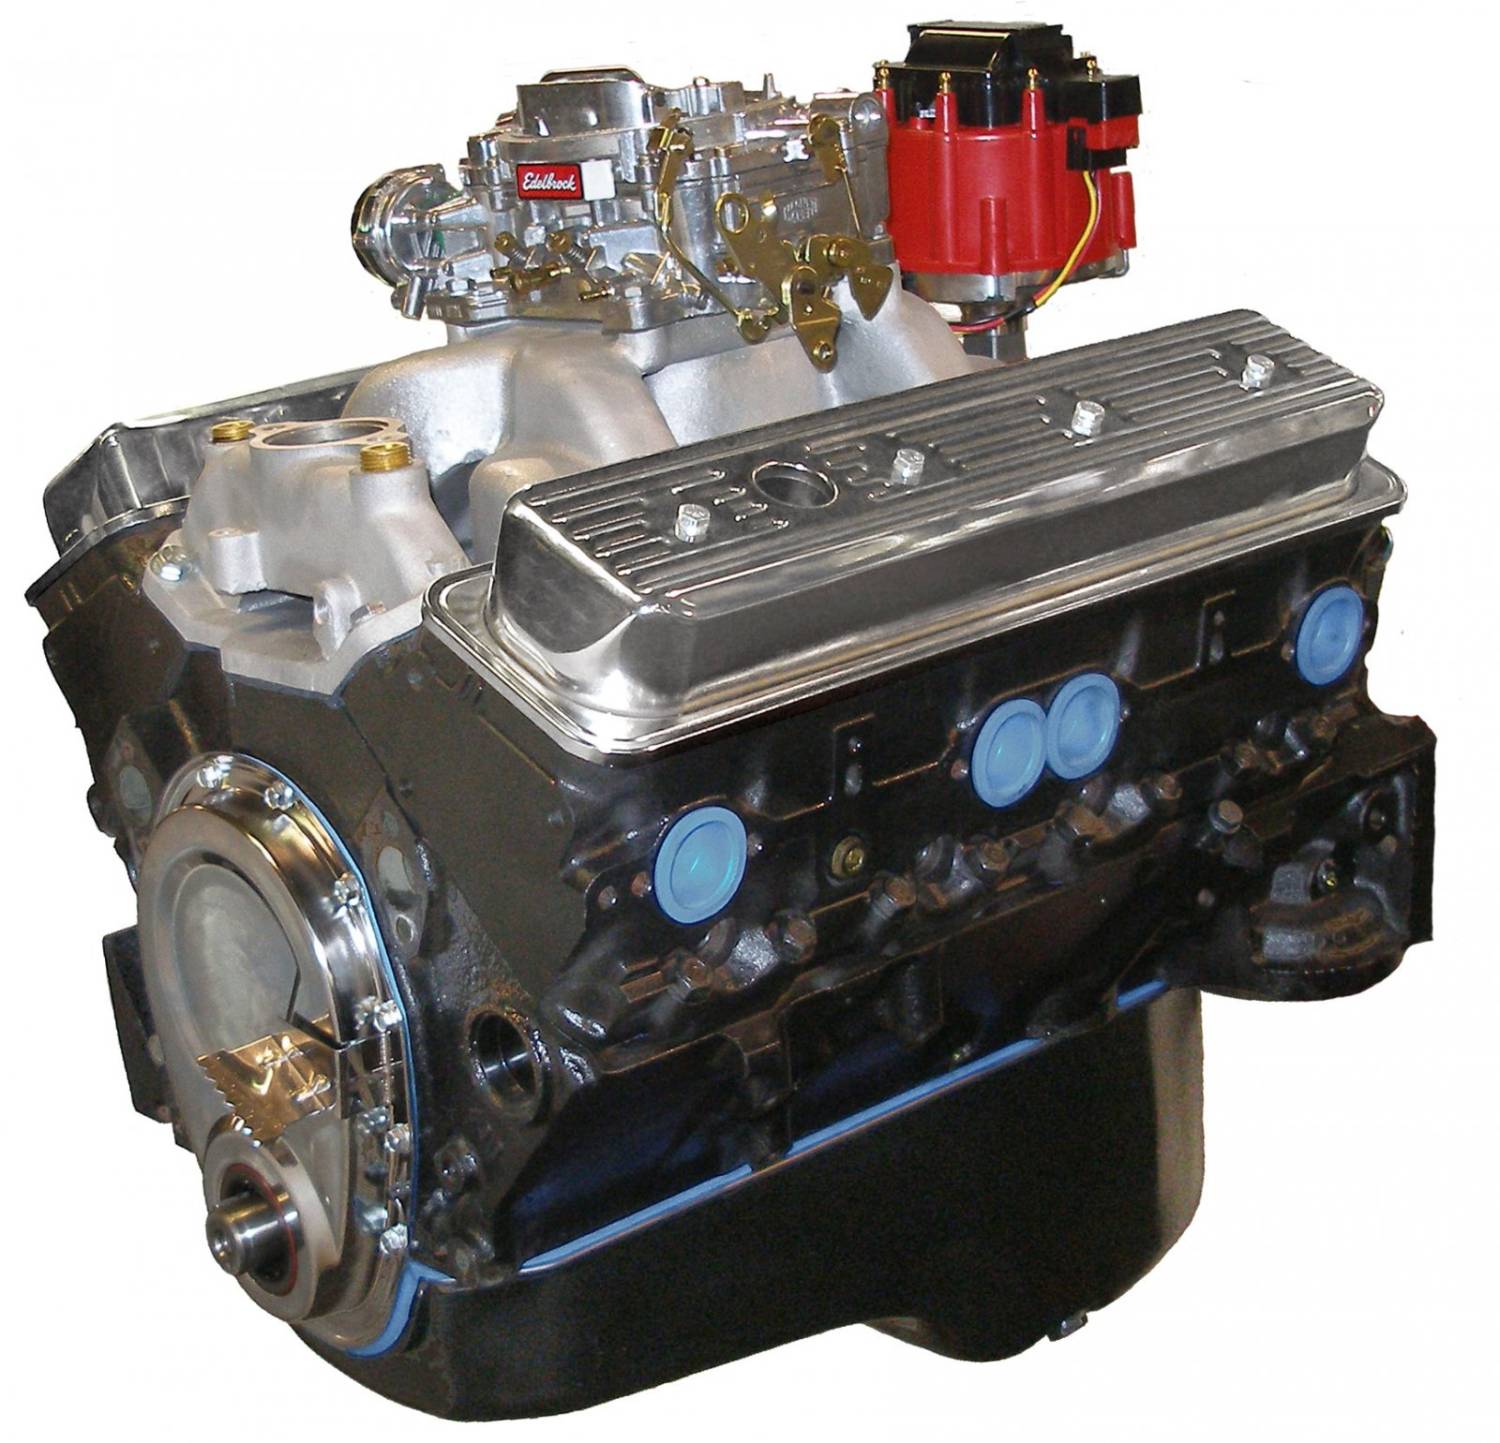 small-block-crate-engine-by-blueprint-engines-383-ci-405-hp-gm-style